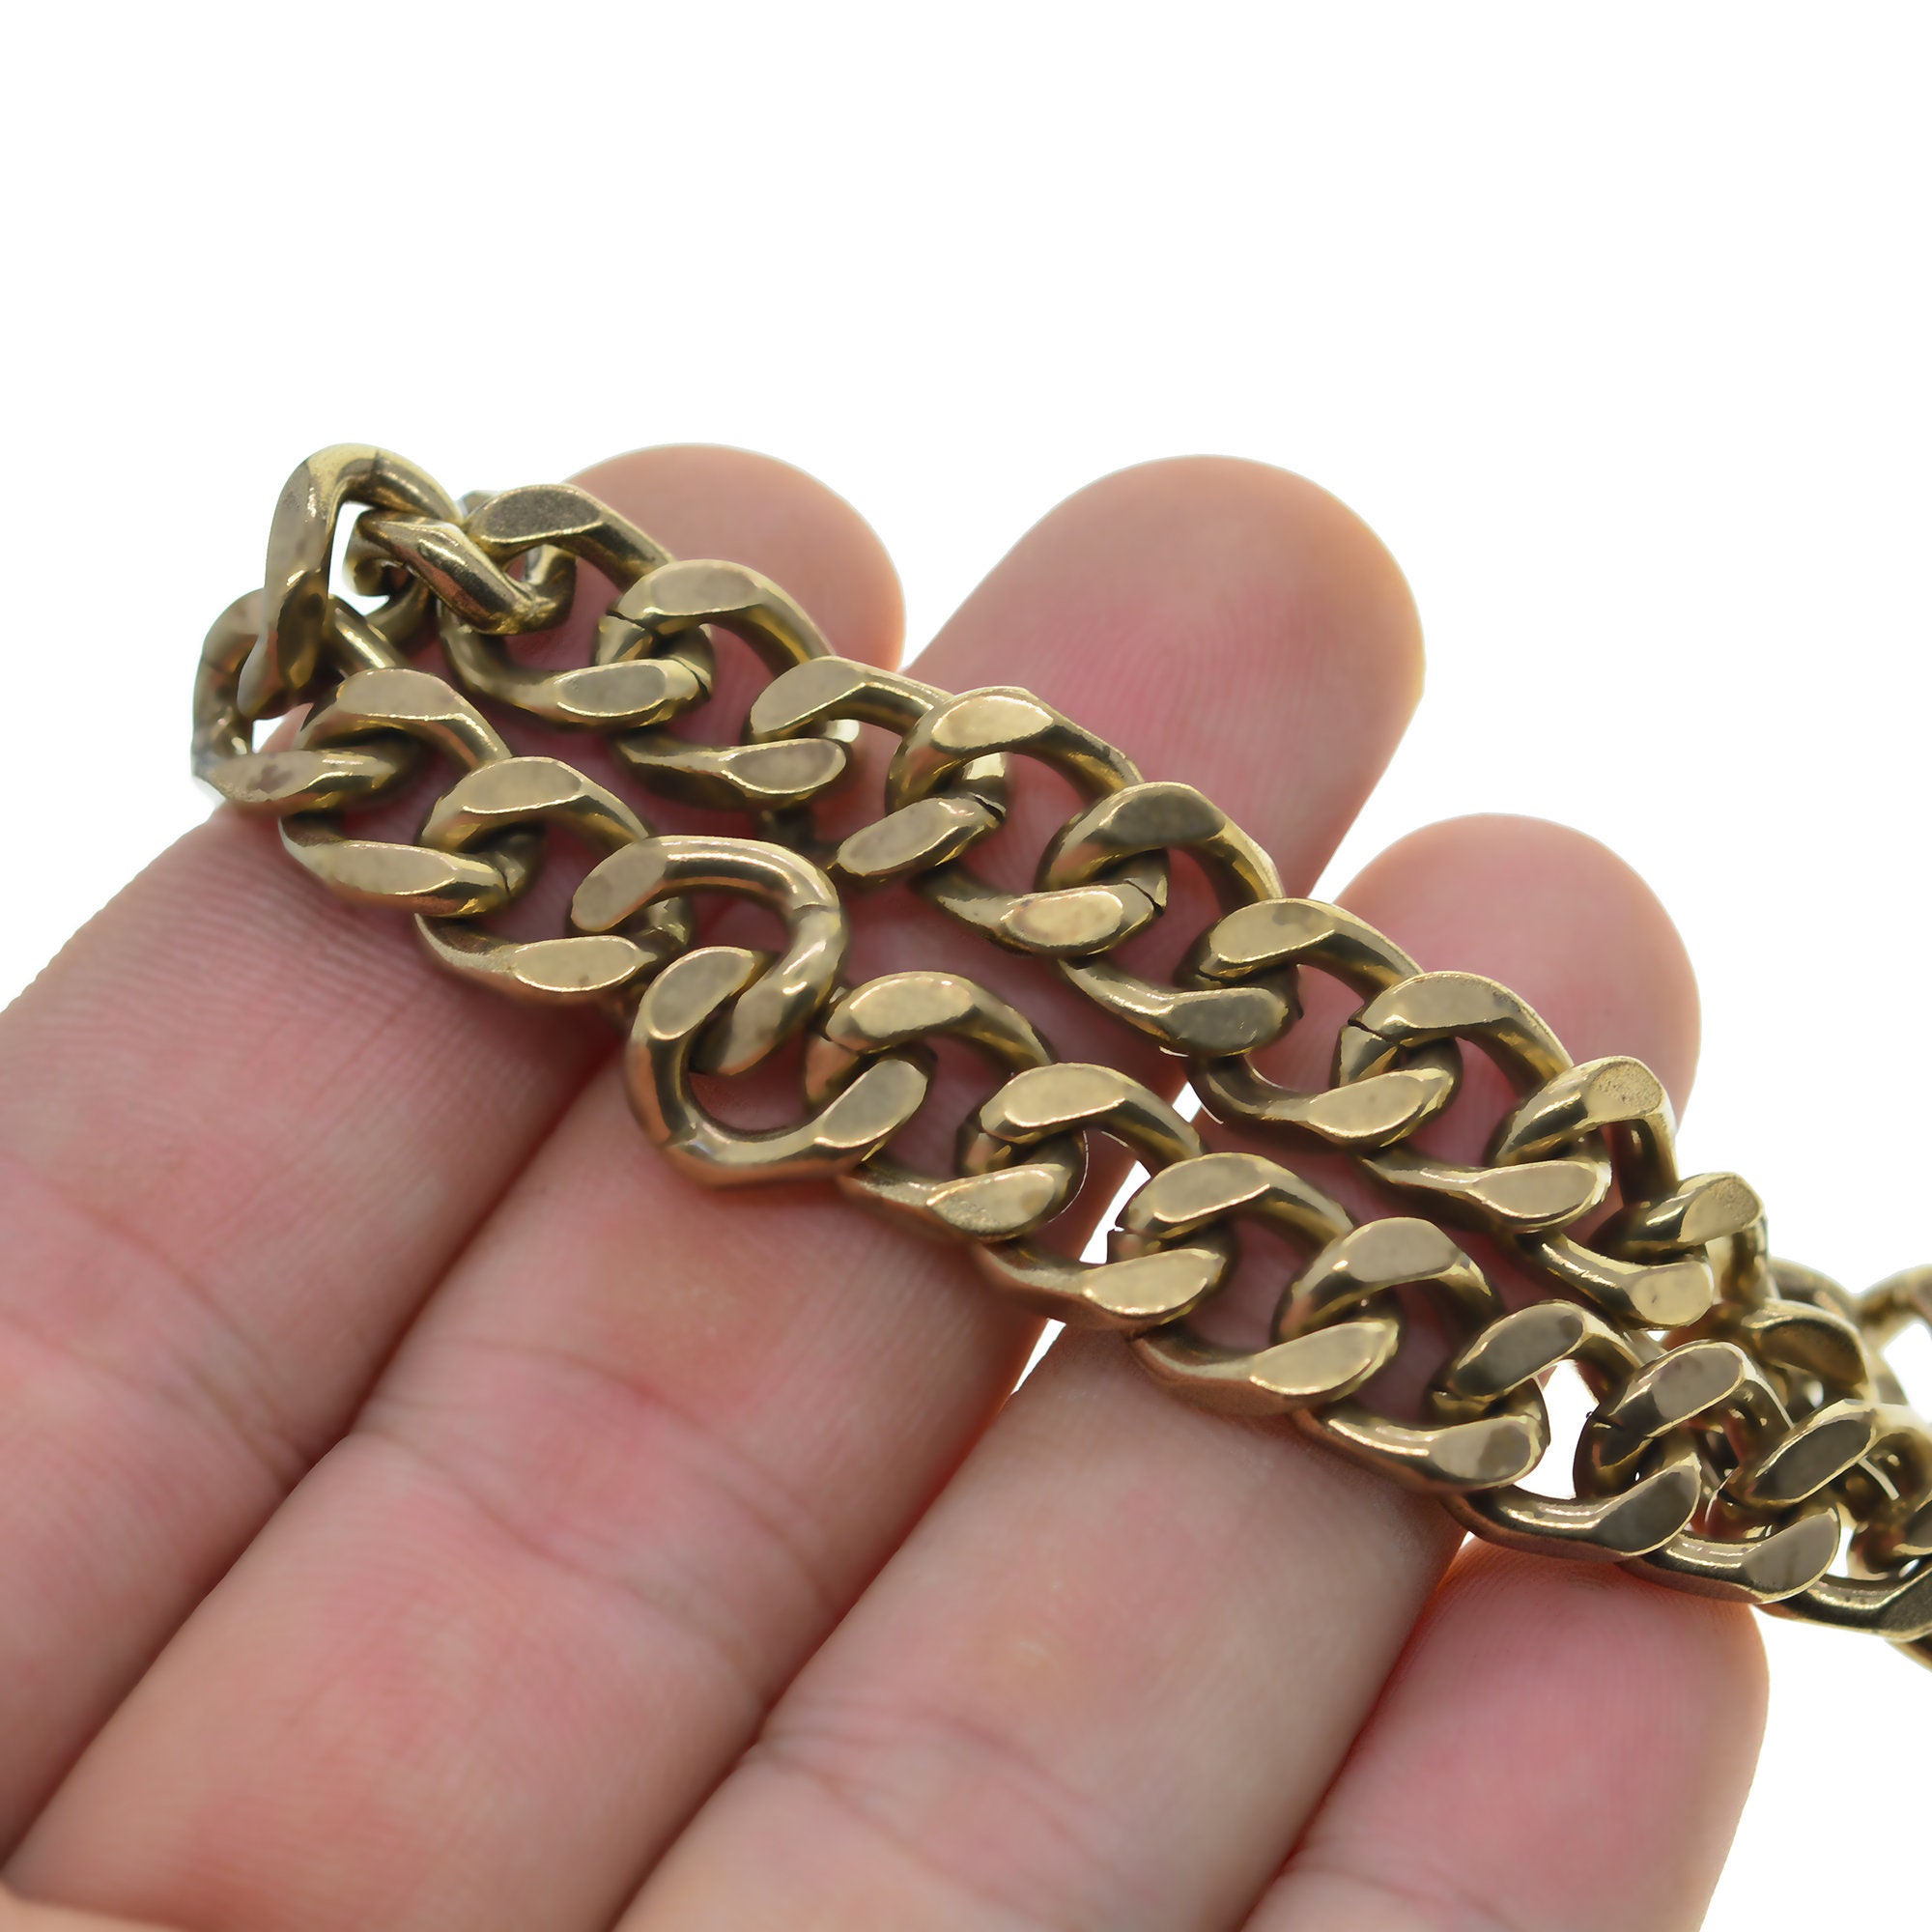 18k Real Gold Plated Brass Thin Curb Cuban Link Chain Mini Spool for  Jewelry Making, Crafts (1.8mm x 1.3) 1.3mm